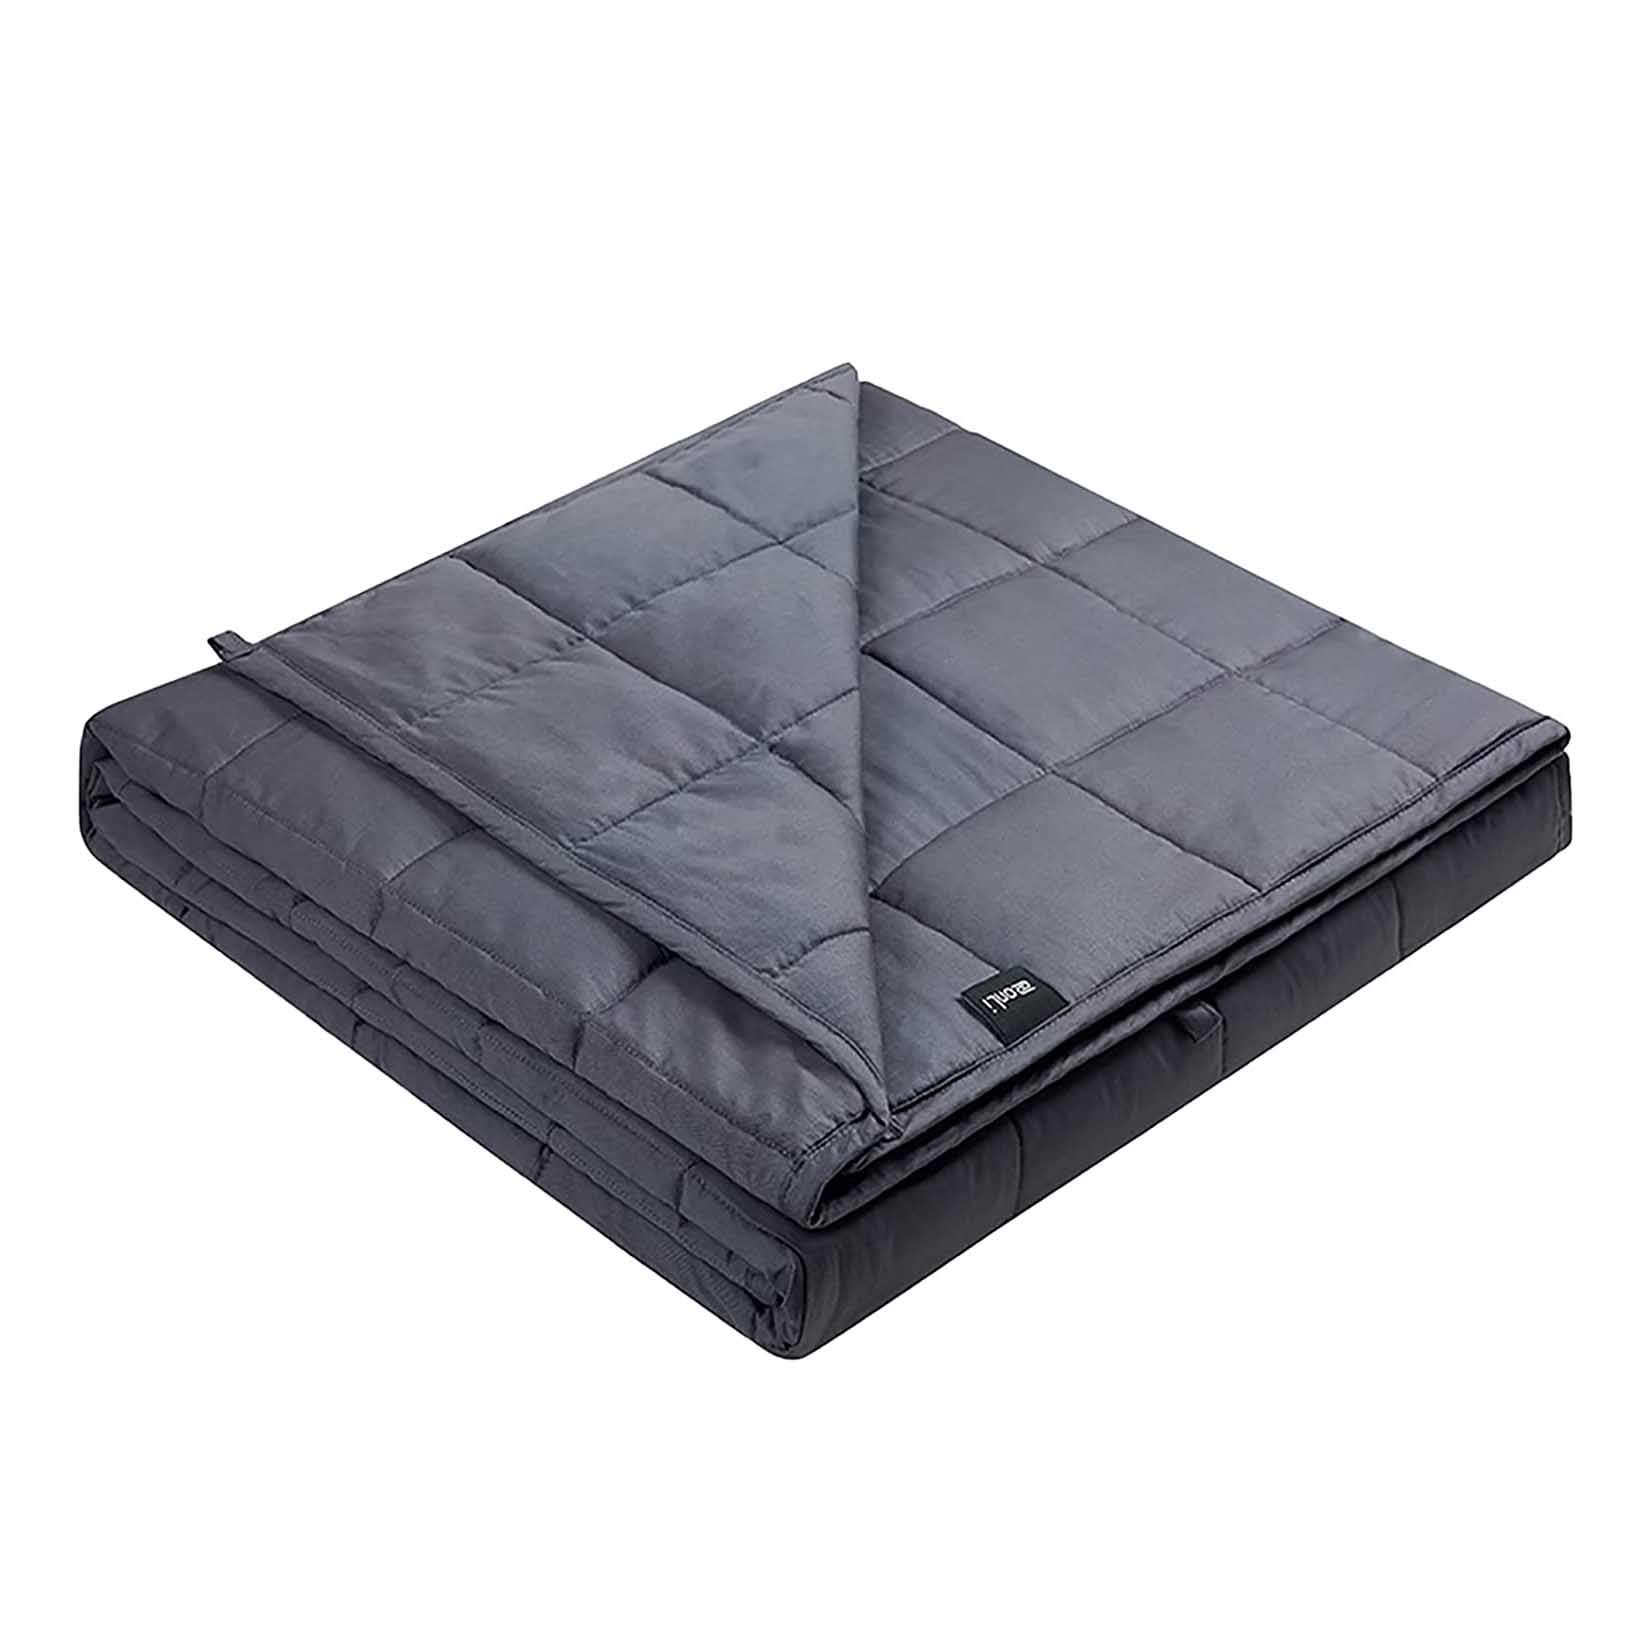 ODM Discount Weighted Knit Blanket Service- Weighted Blanket (60”x80”, 20lbs, Dark Grey), Cooling Weighted Blanket for Adults, High Breathability Heavy Blanket, Soft Material with Prem...